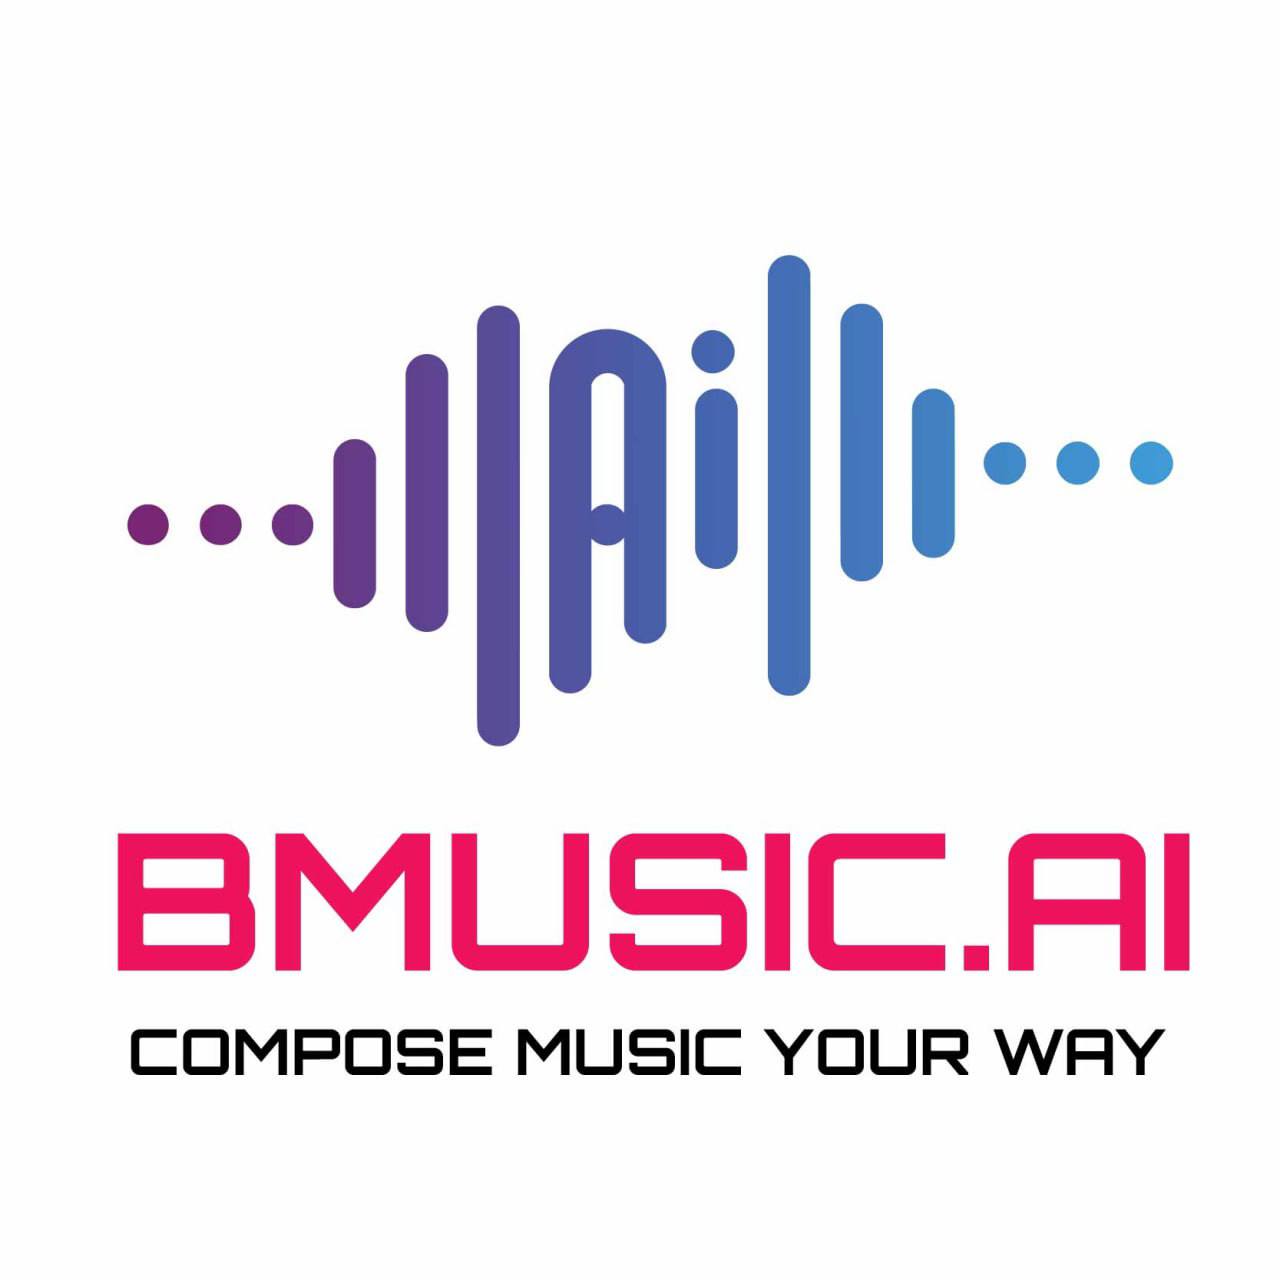 BMUSIC is an AI compose music automatically according to the user requests